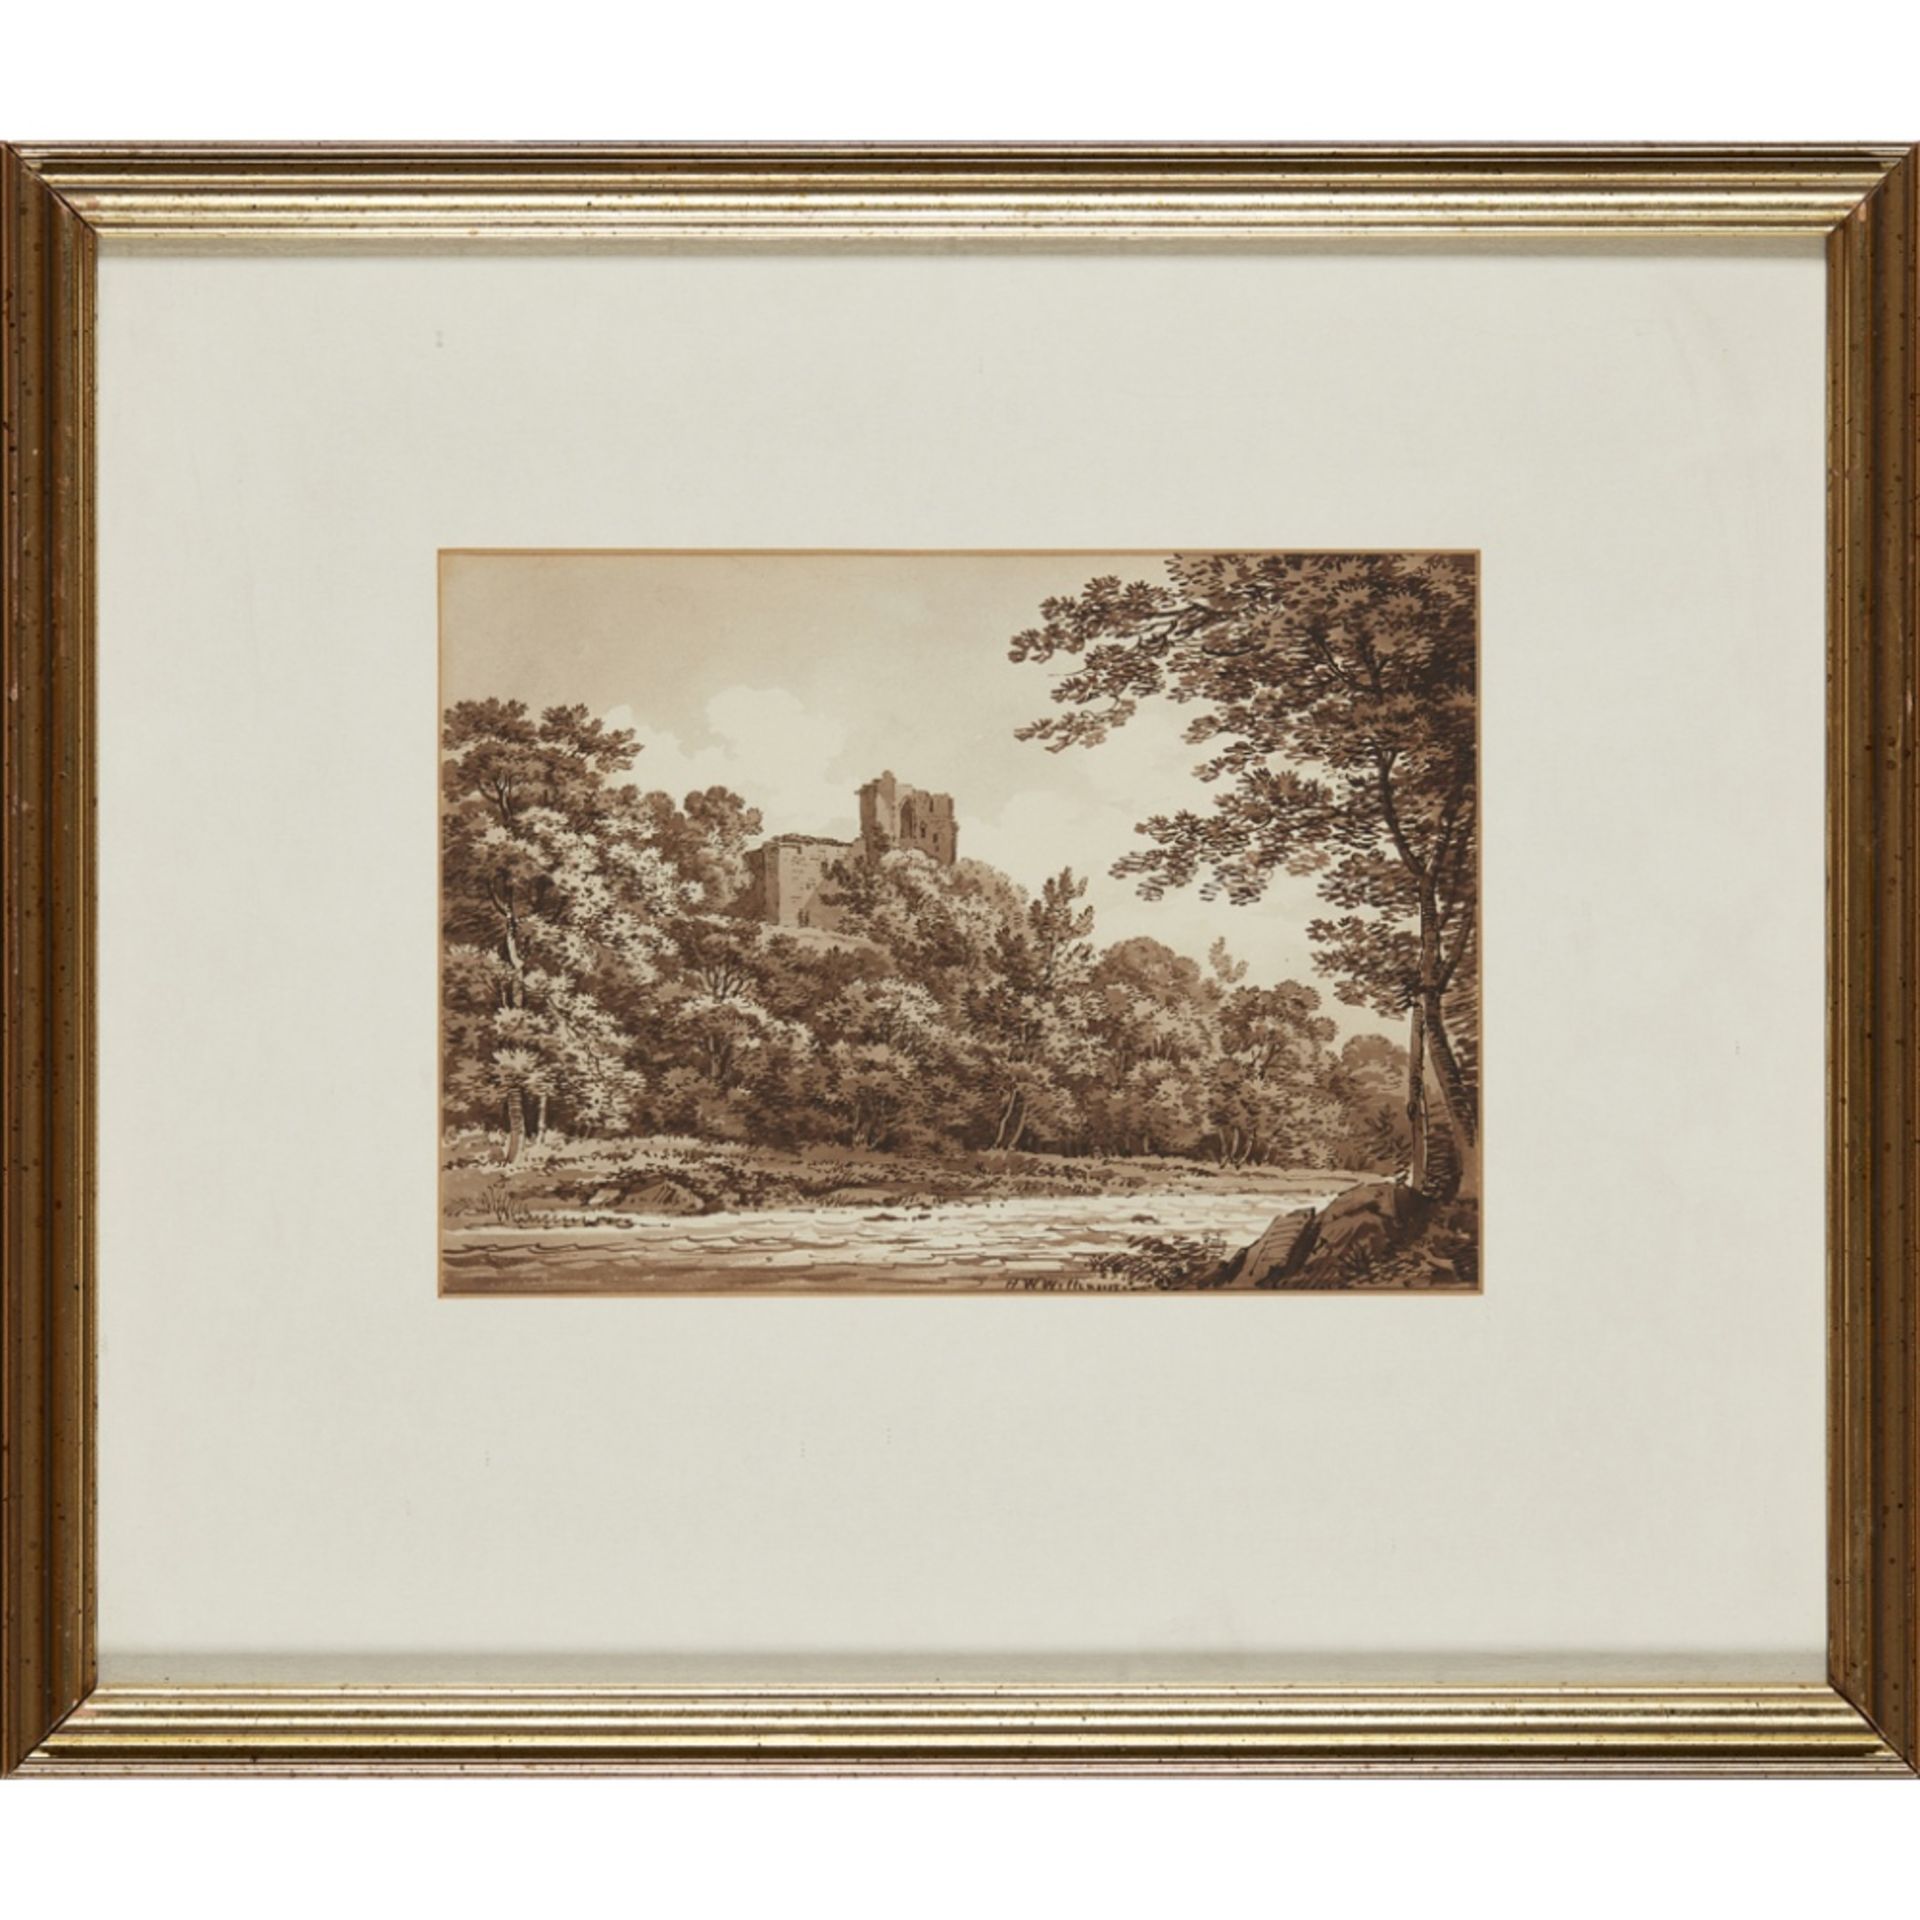 HUGH (GRECIAN) WILLIAM WILLIAMS (SCOTTISH 1773-1829)BOTHWELL CASTLE Signed and dated 1796, pen and - Image 4 of 4